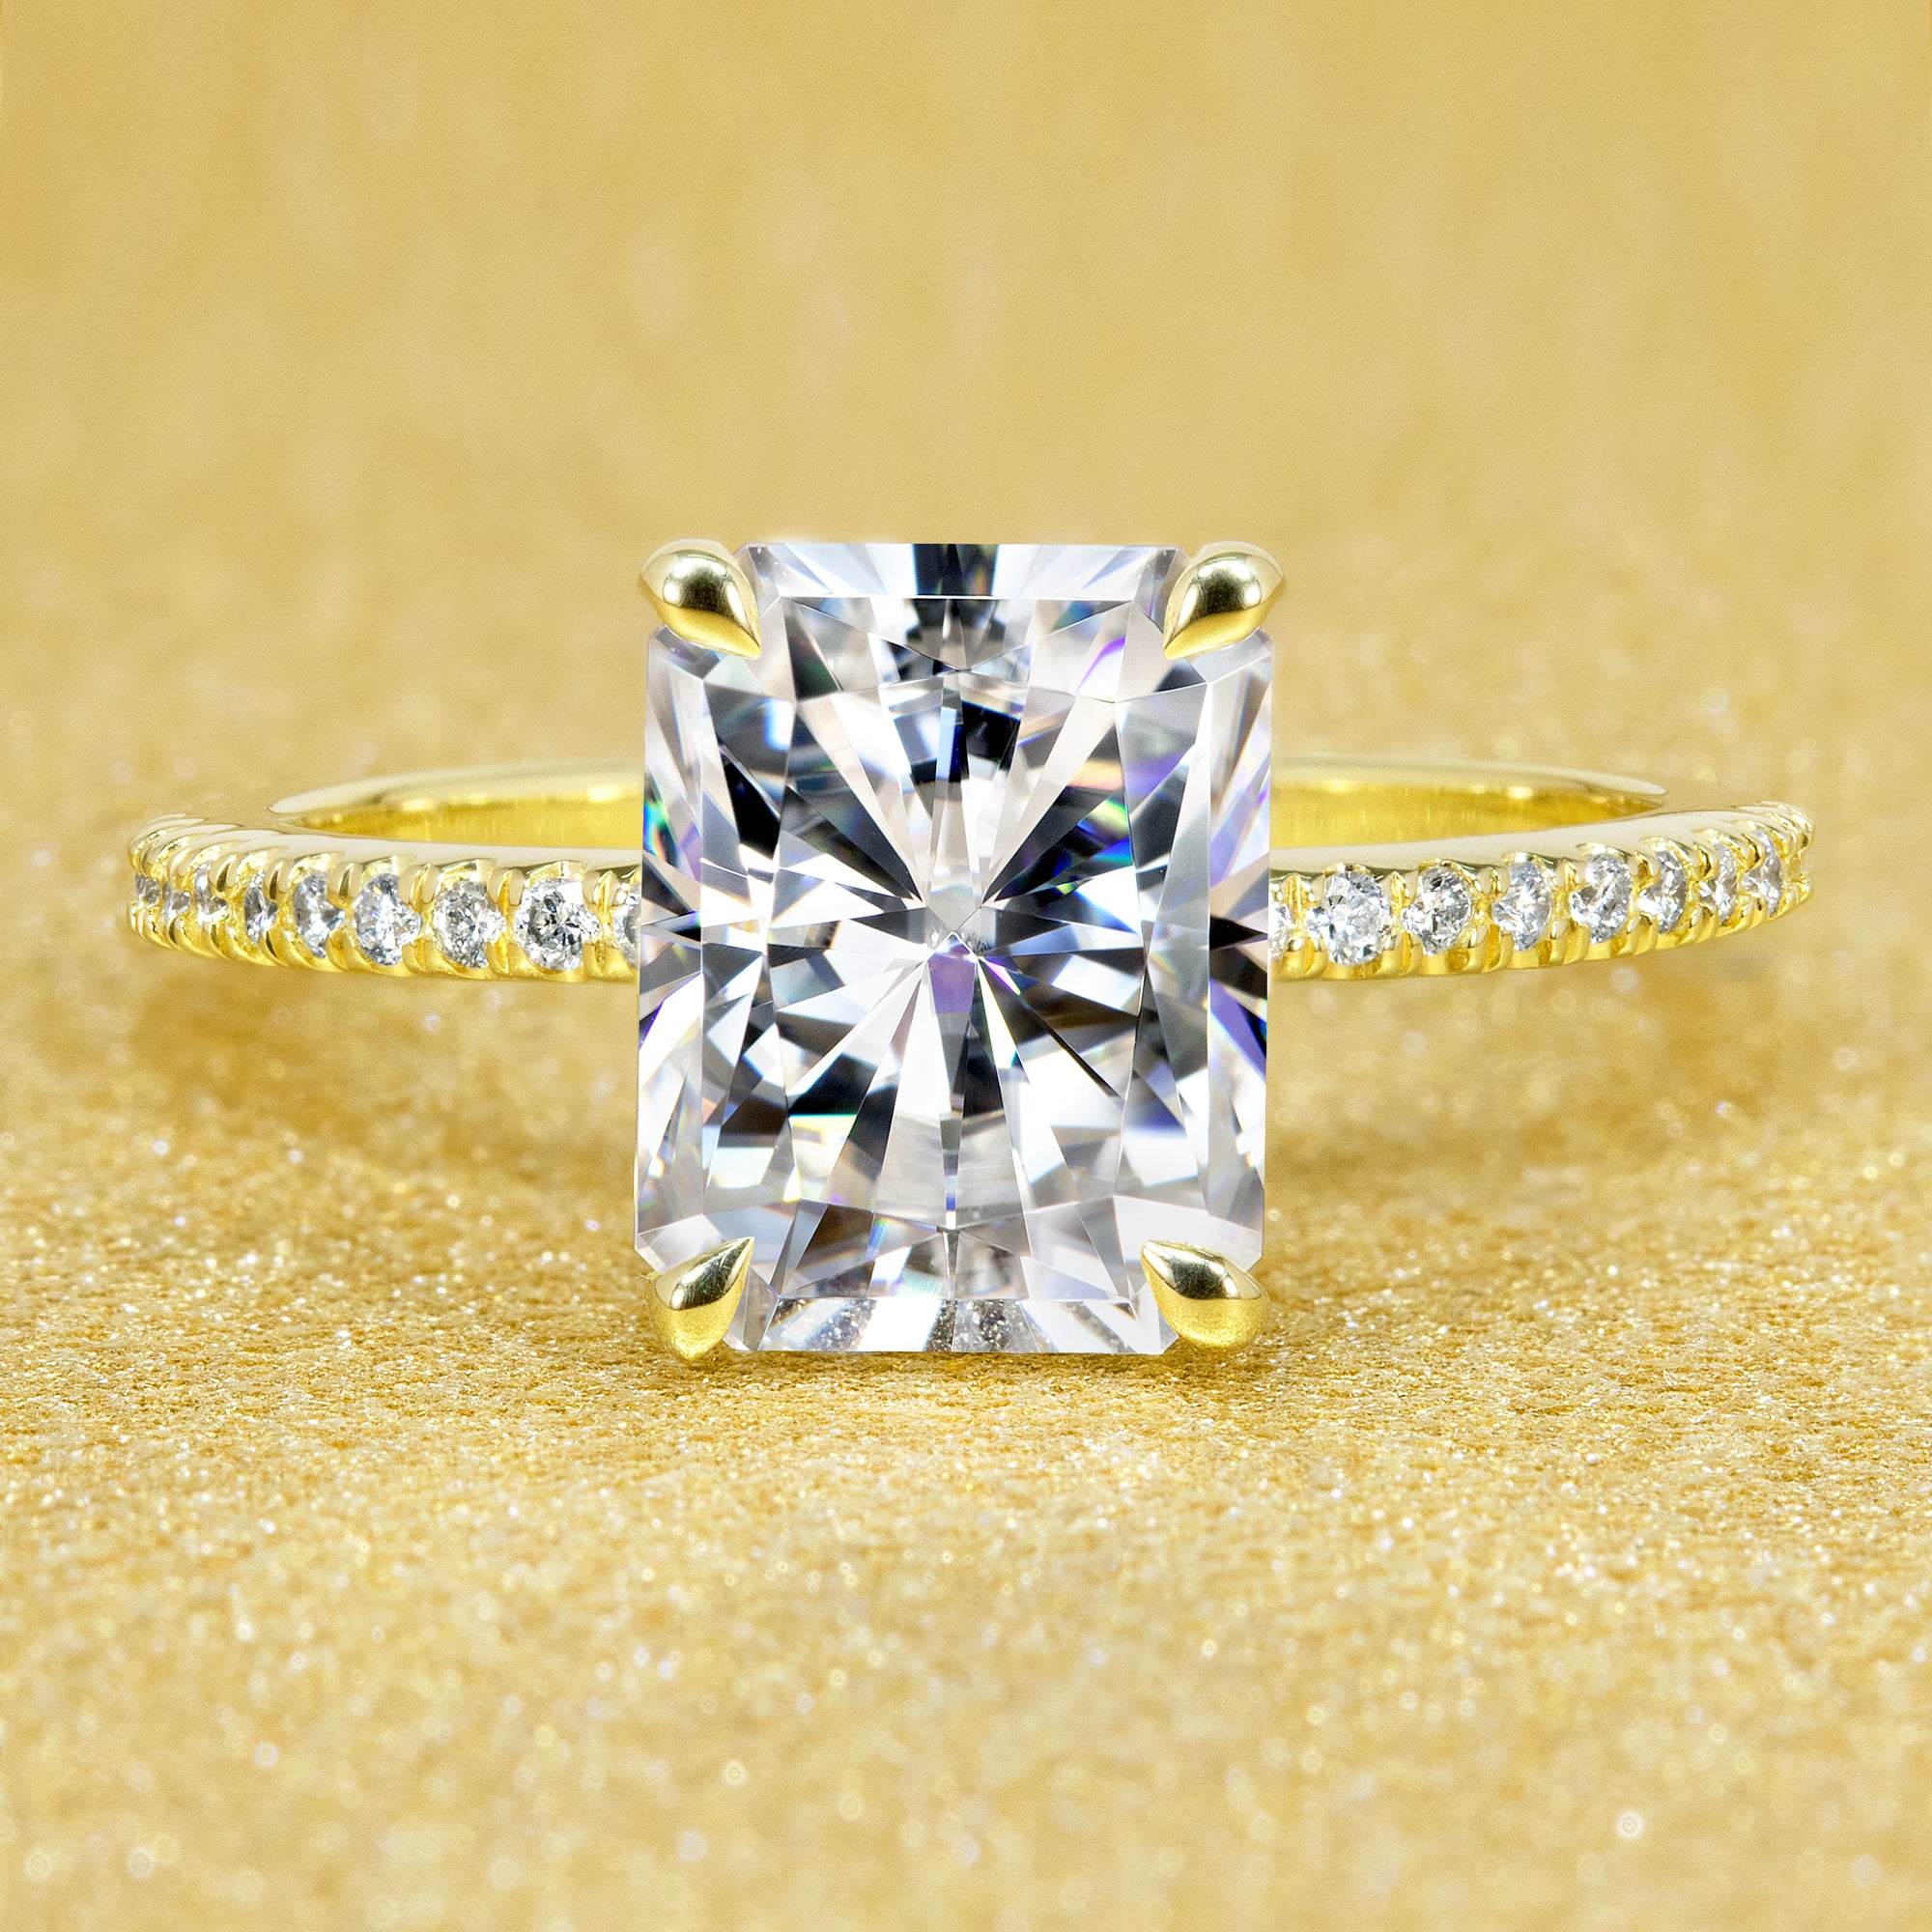 delicate and slim petite diamond and moissanite engagement rings.